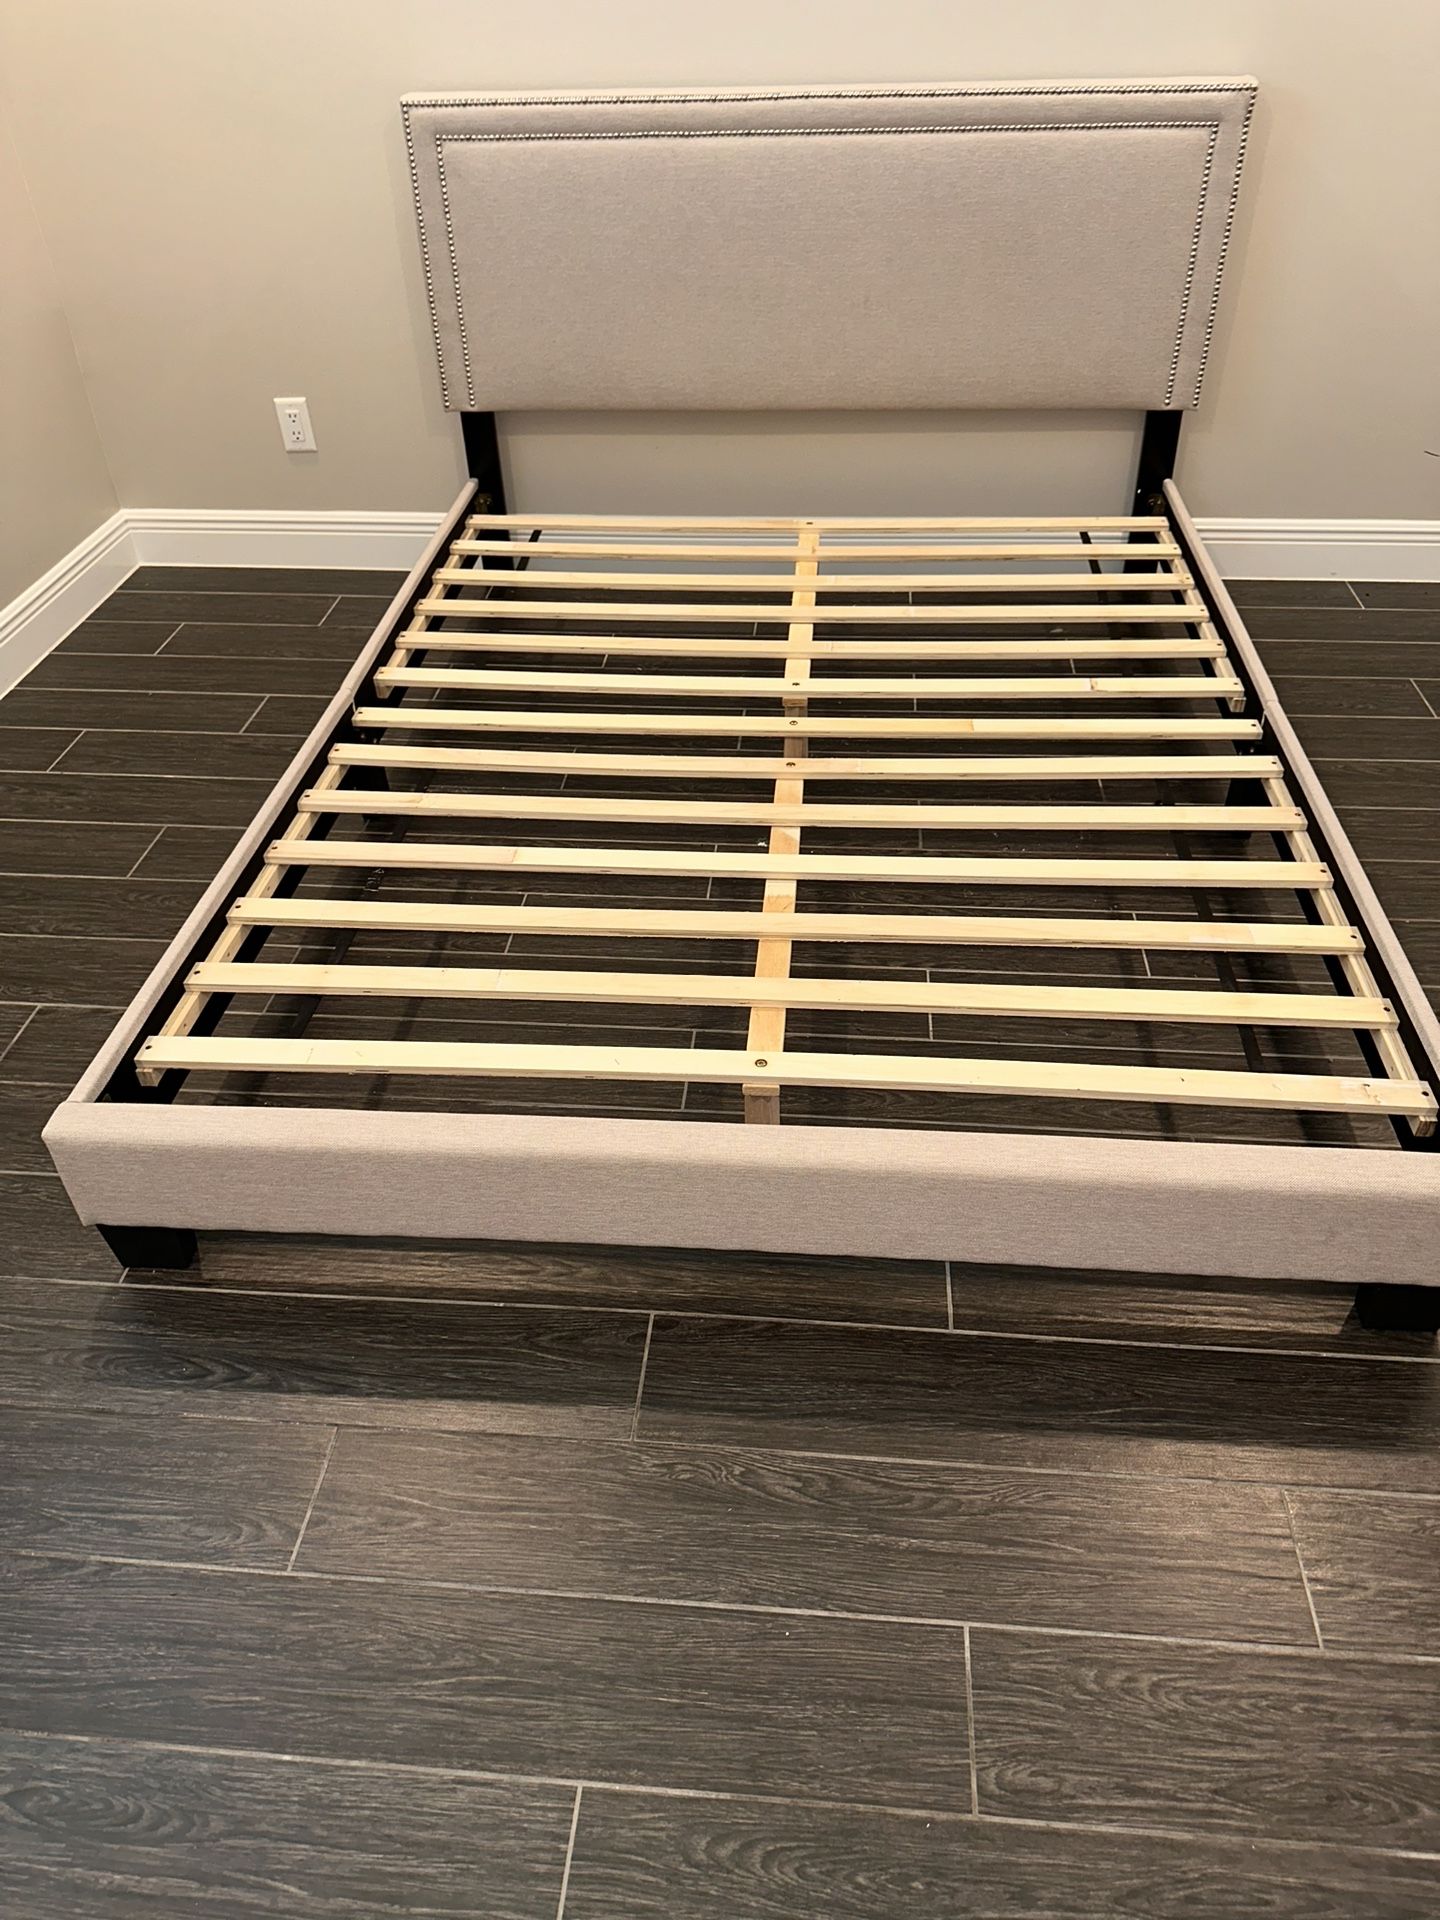 Queen Size Upholstered Bed Frame